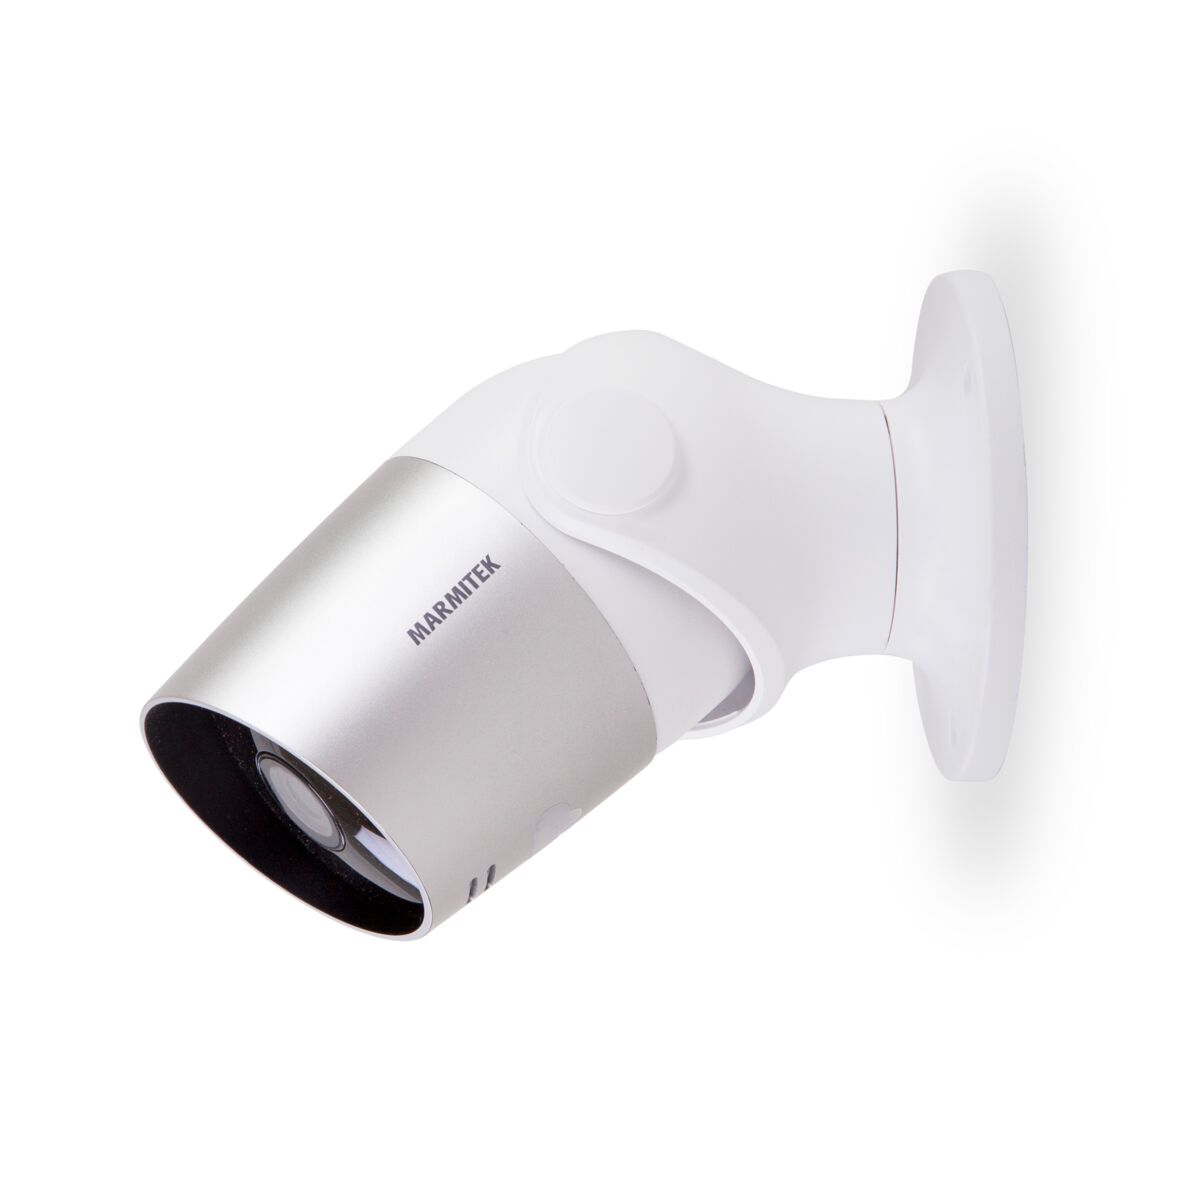 View MO - Wi-Fi camera outdoor - Side View Image with camera pointing left mounted on wall | Marmitek